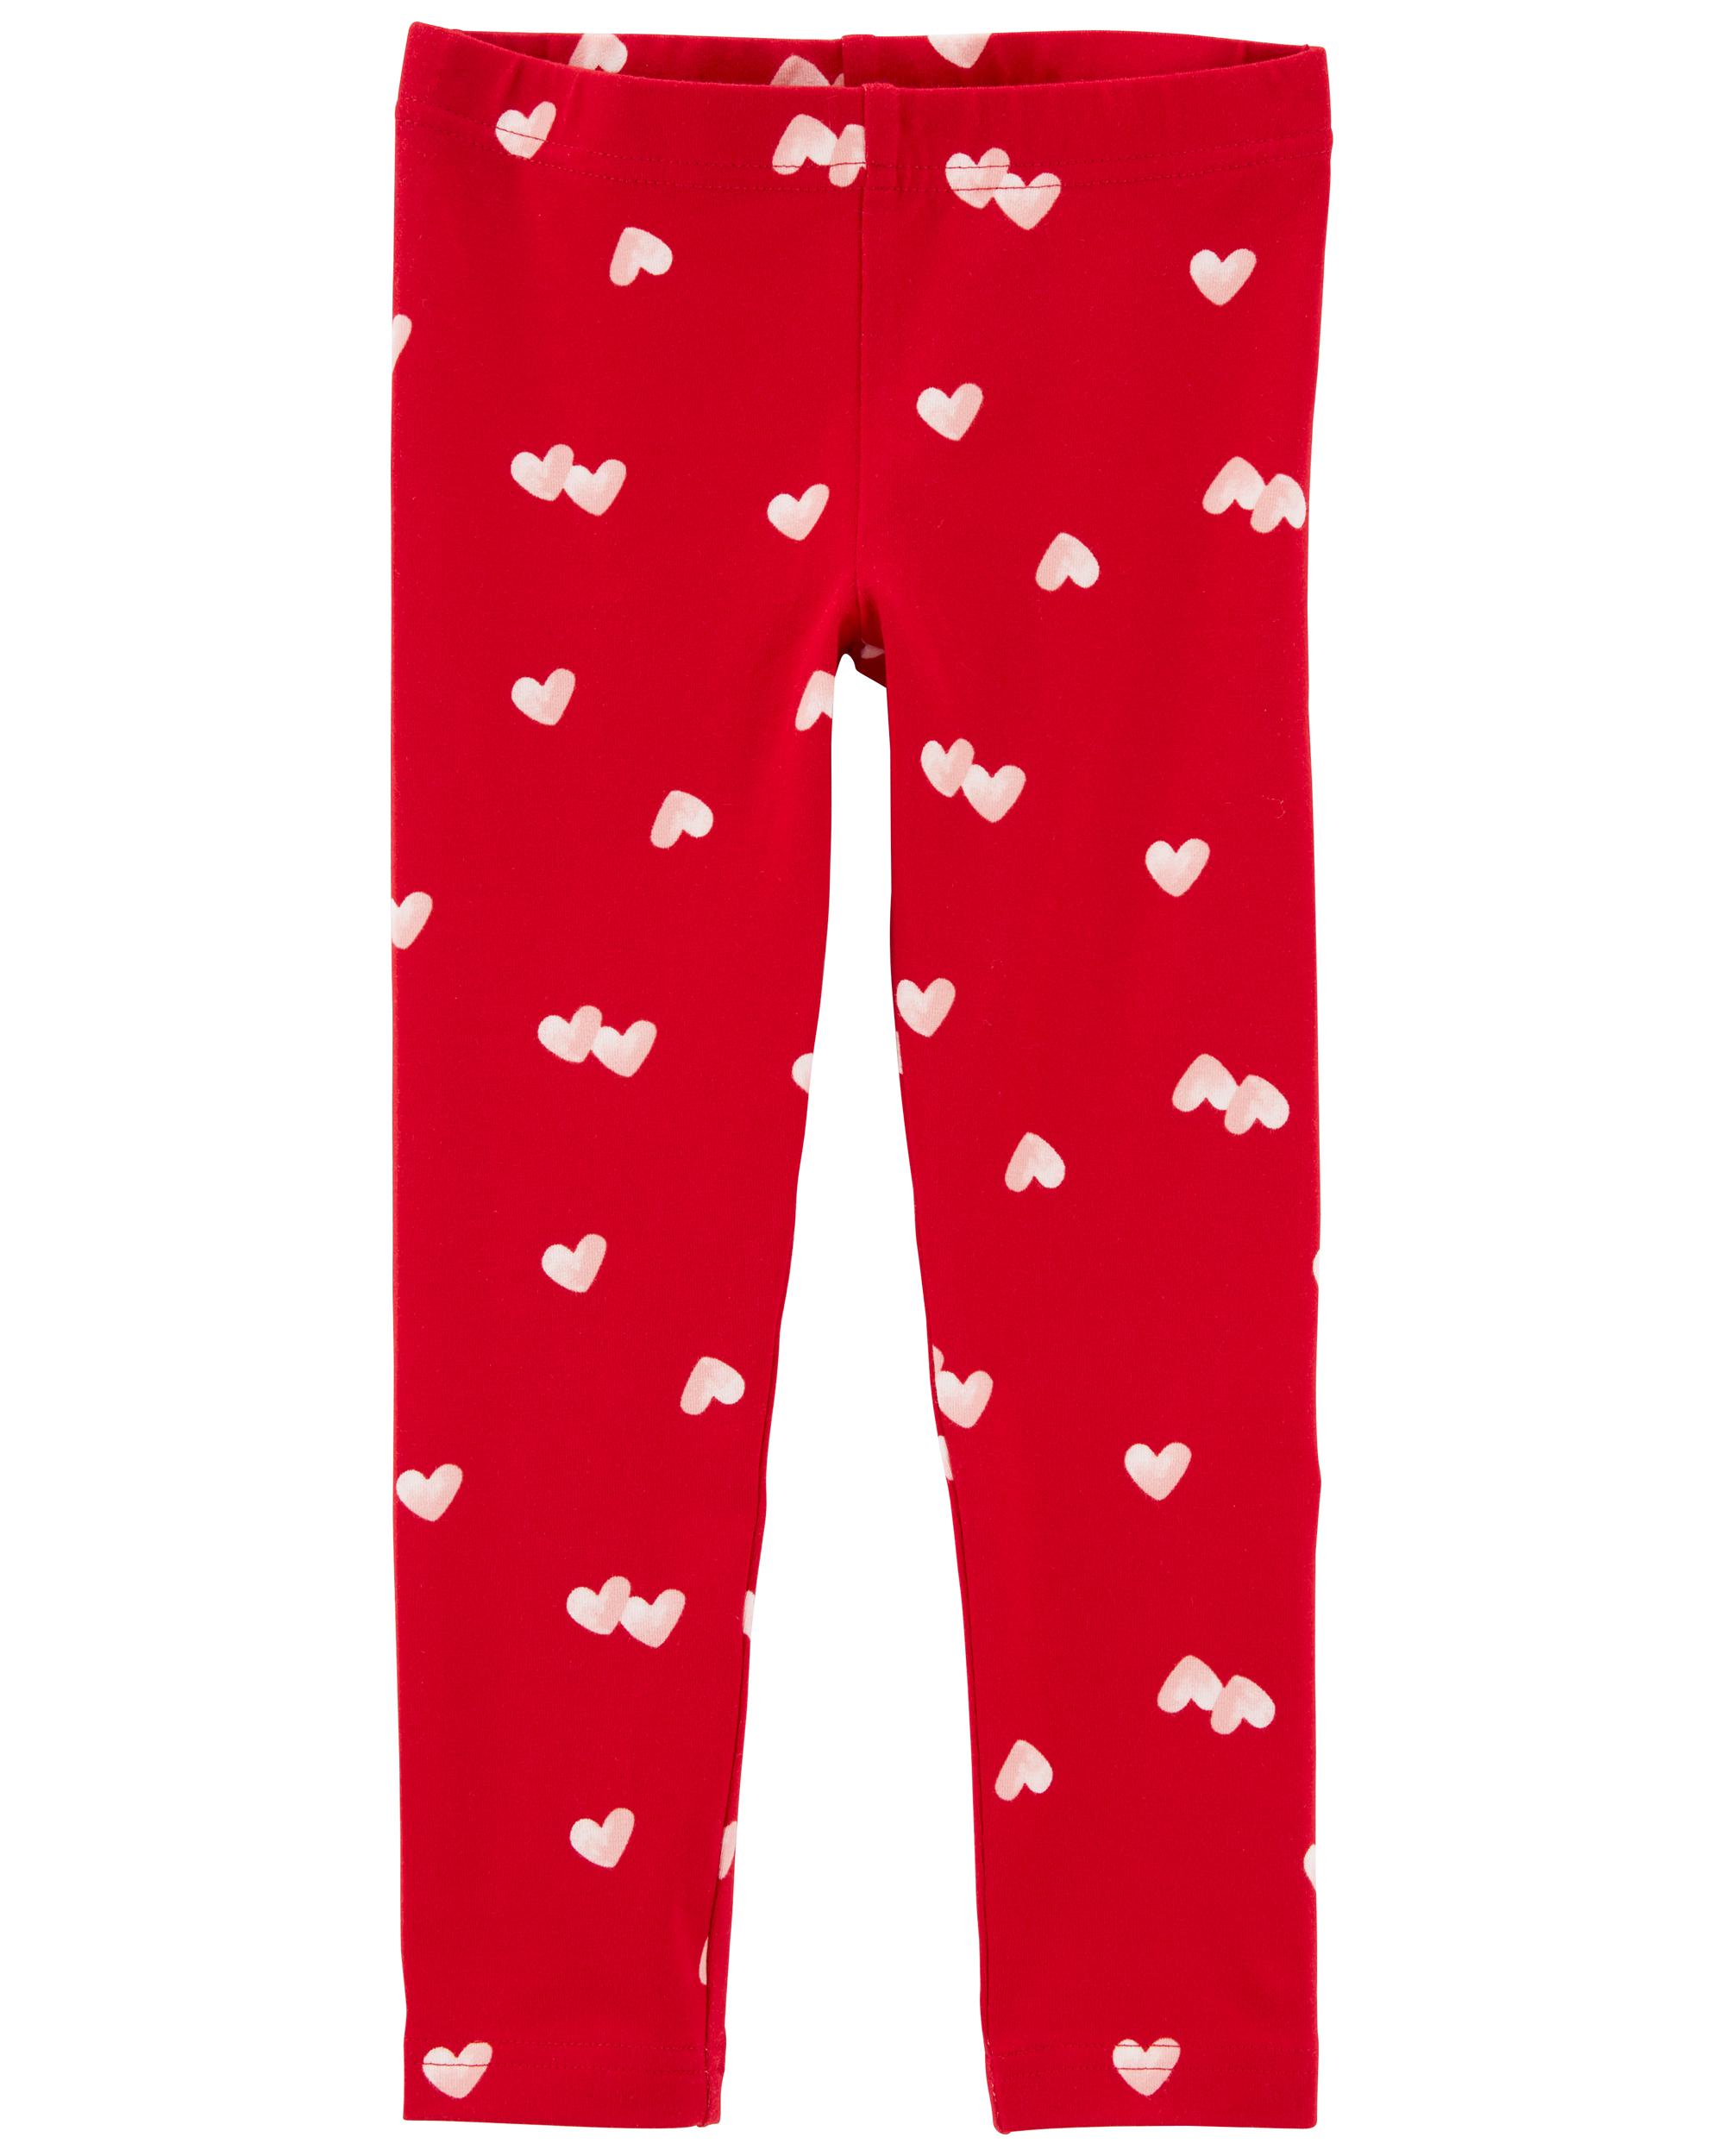 Mommy and Me Matching Leggings Hearts Tights Pants Valentines